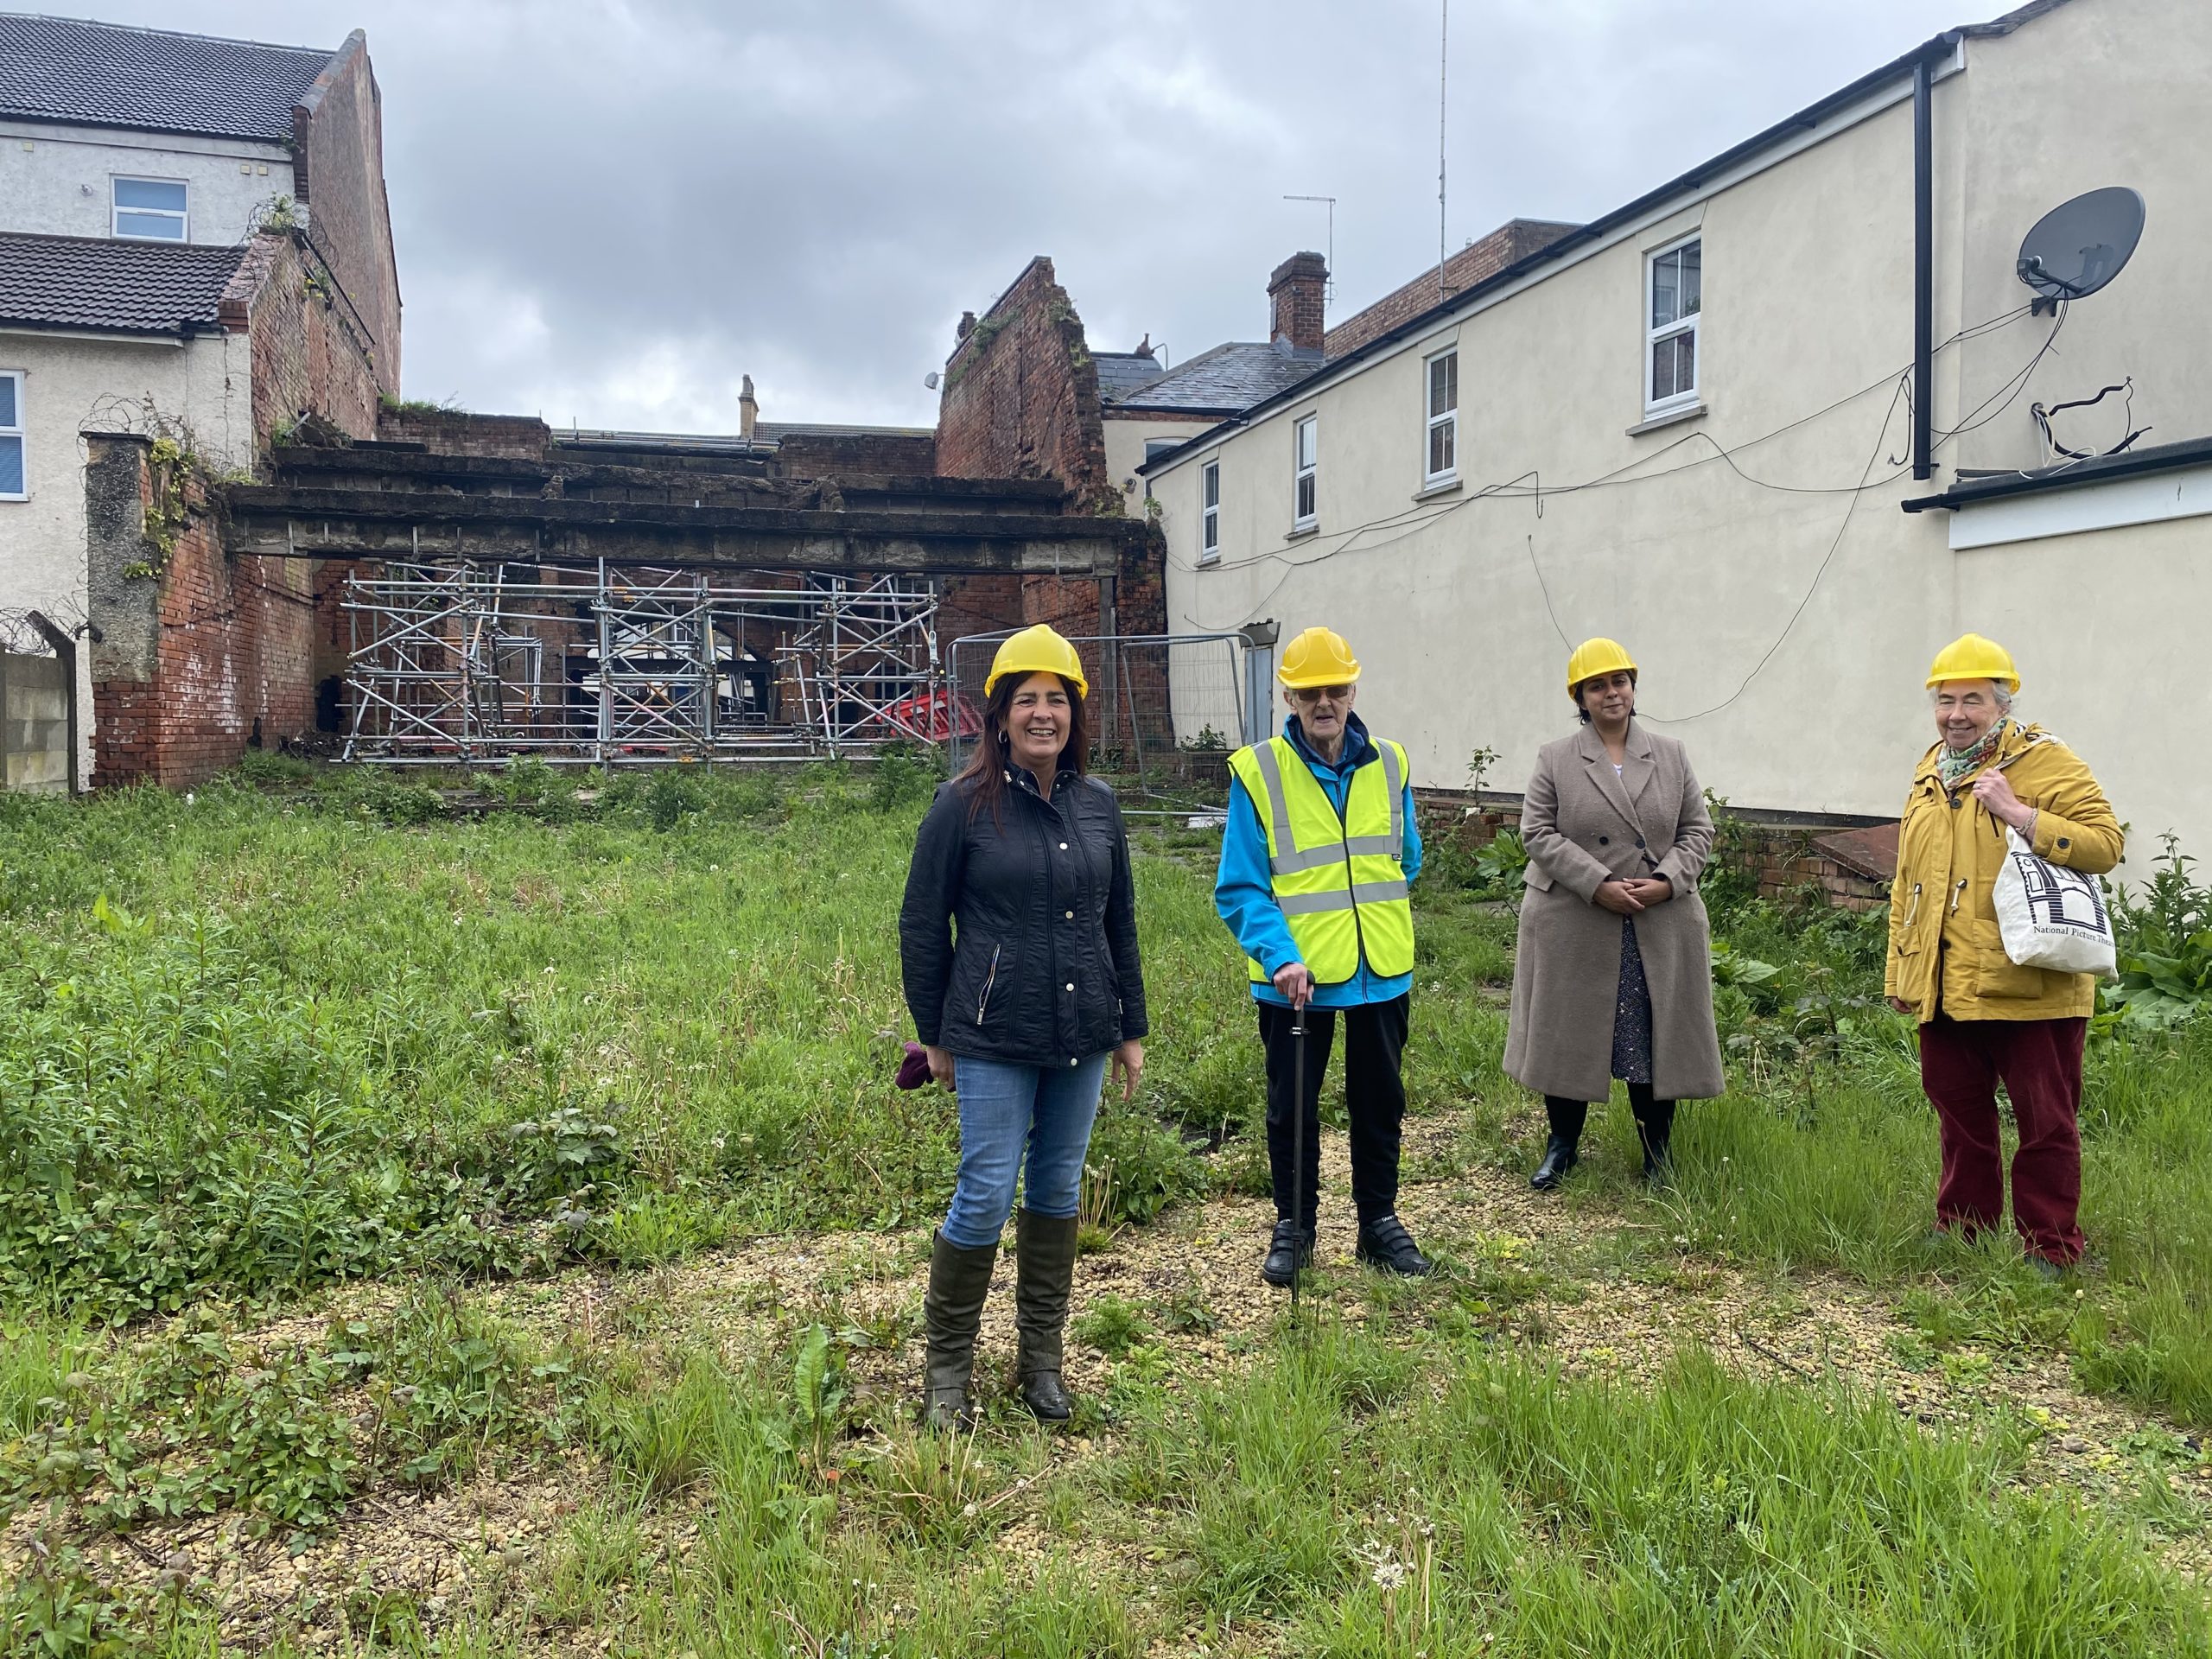 Members of the National Picture Theatre project team can now prepare to start work on site.